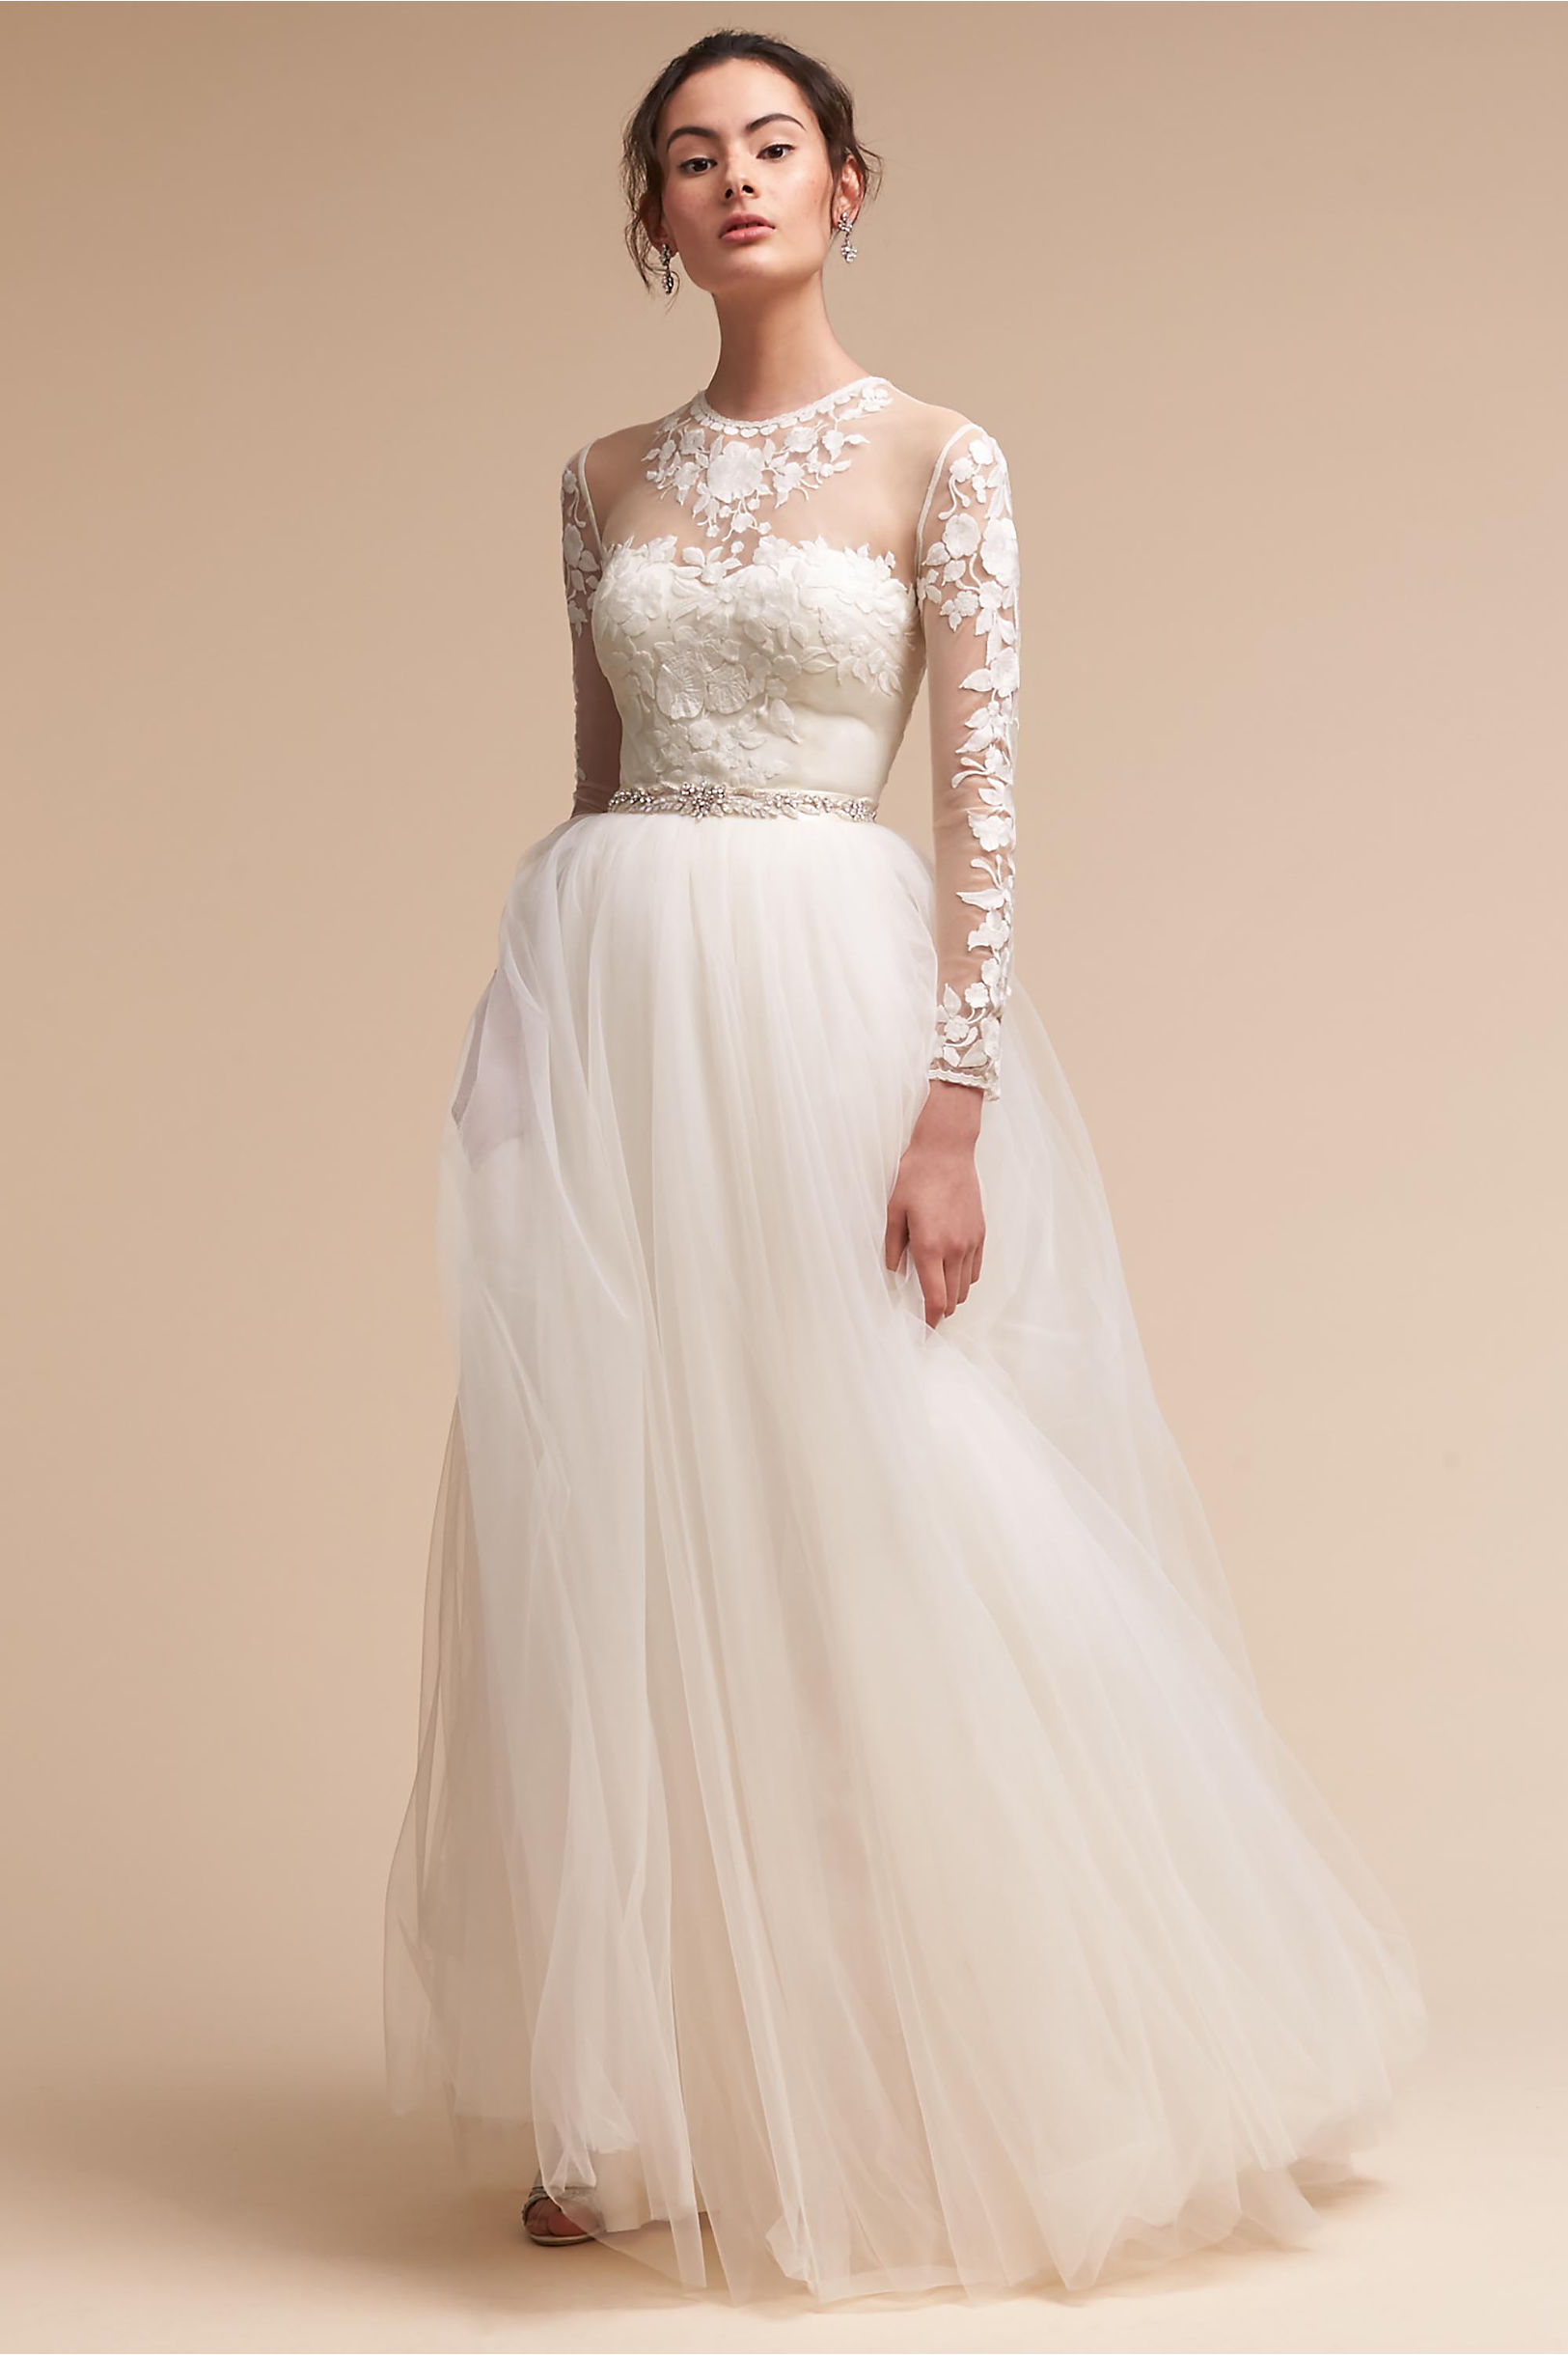 Gorgeous Wedding Dress with Bodysuit and Skirt - Bridal Separates